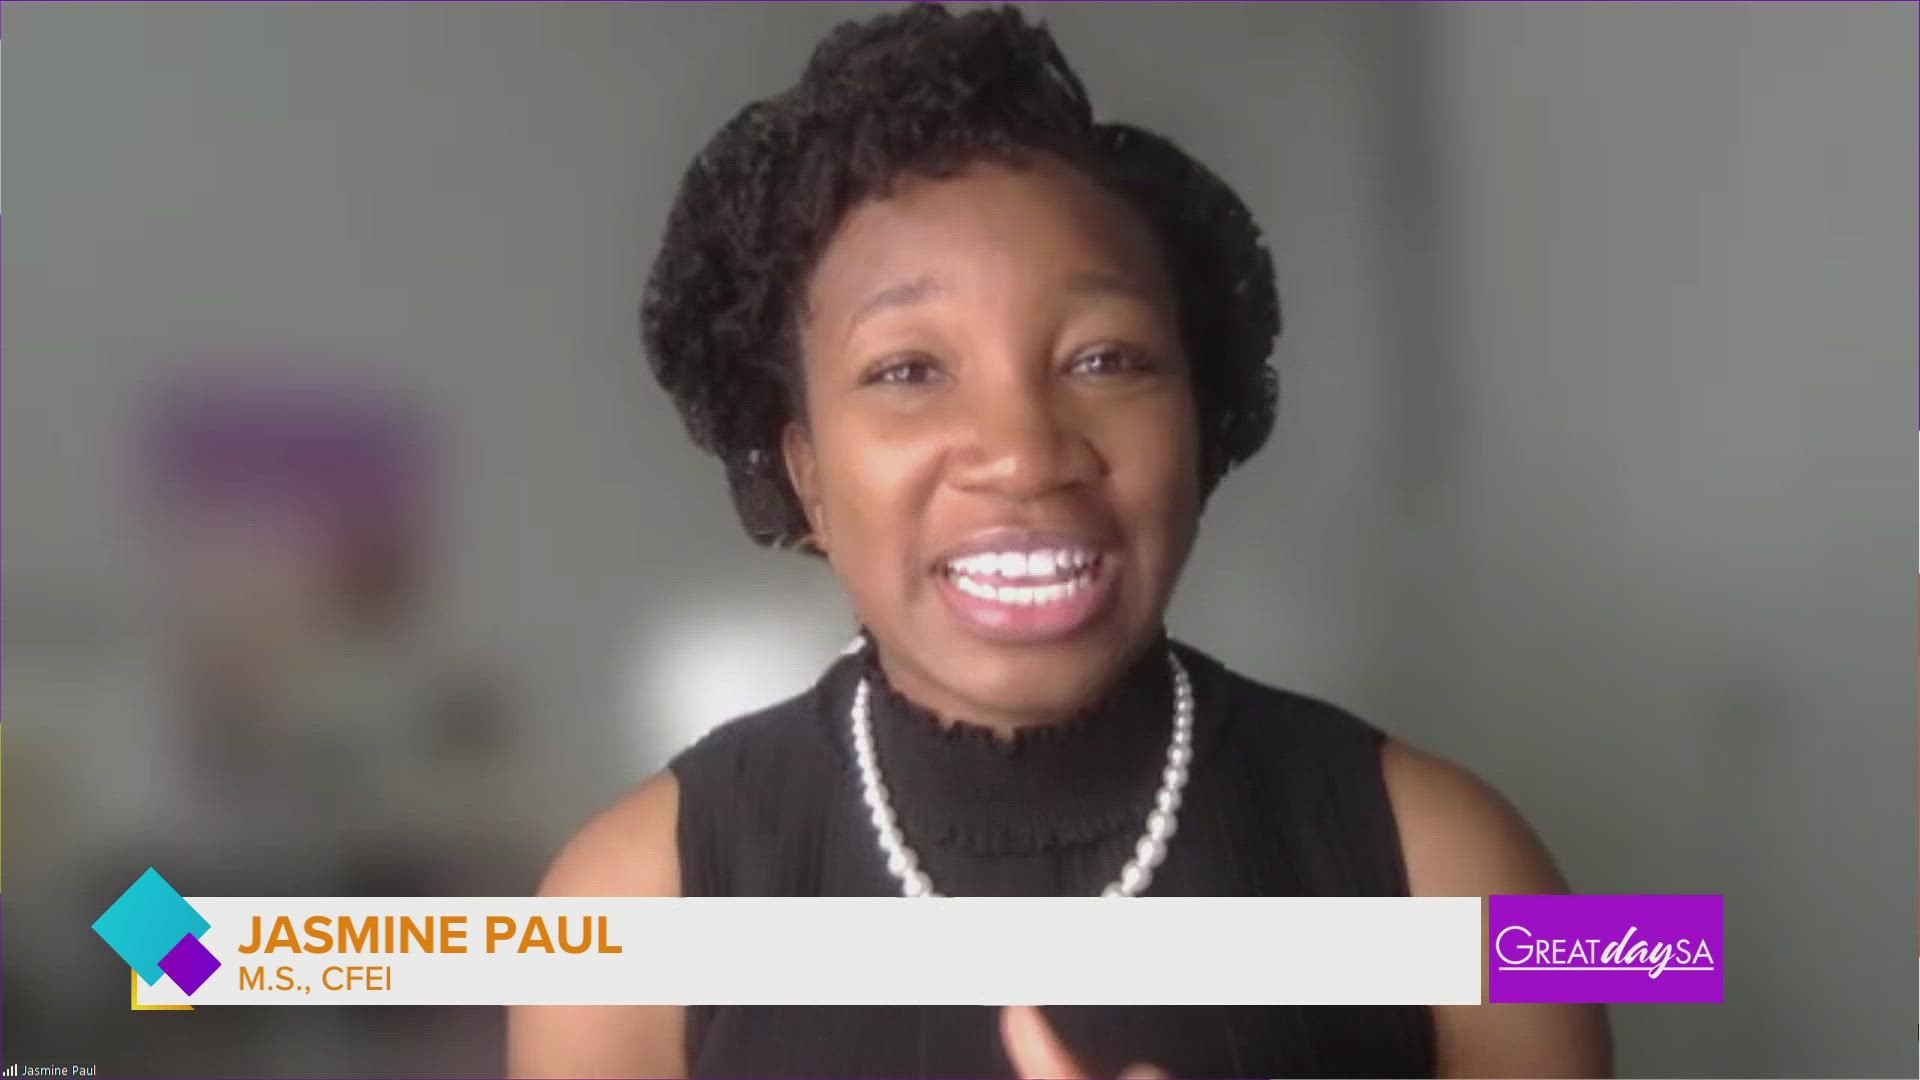 Author, Jasmine Paul, shares why it's important to start teaching young kids about money